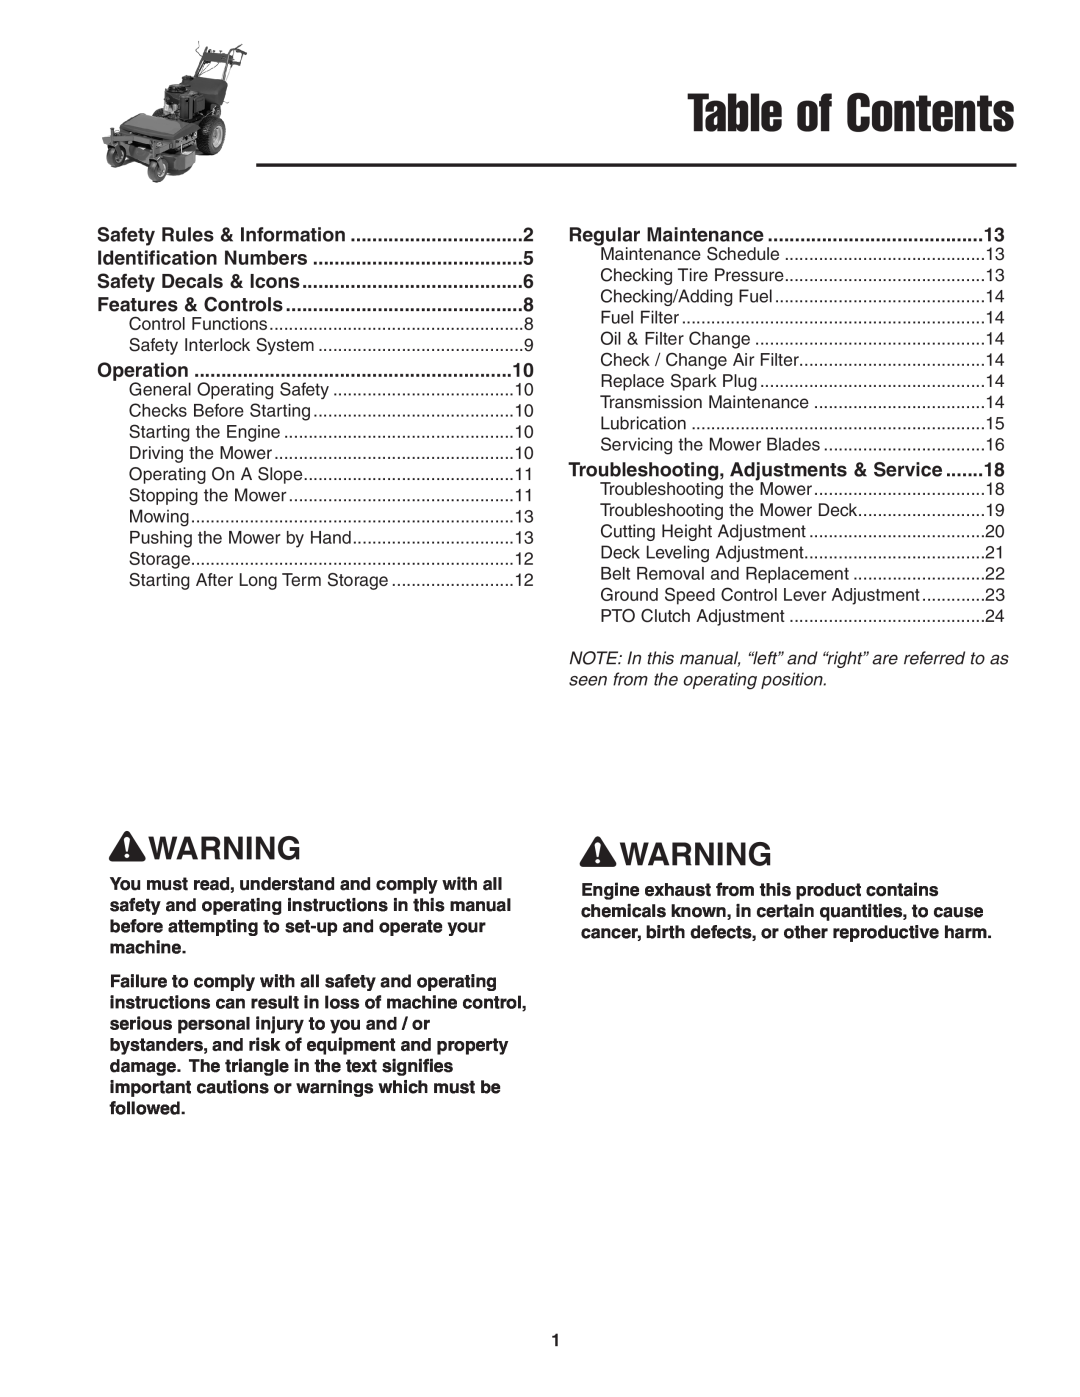 Snapper 13HP manual Table of Contents, Operation, Safety Decals & Icons, Regular Maintenance 